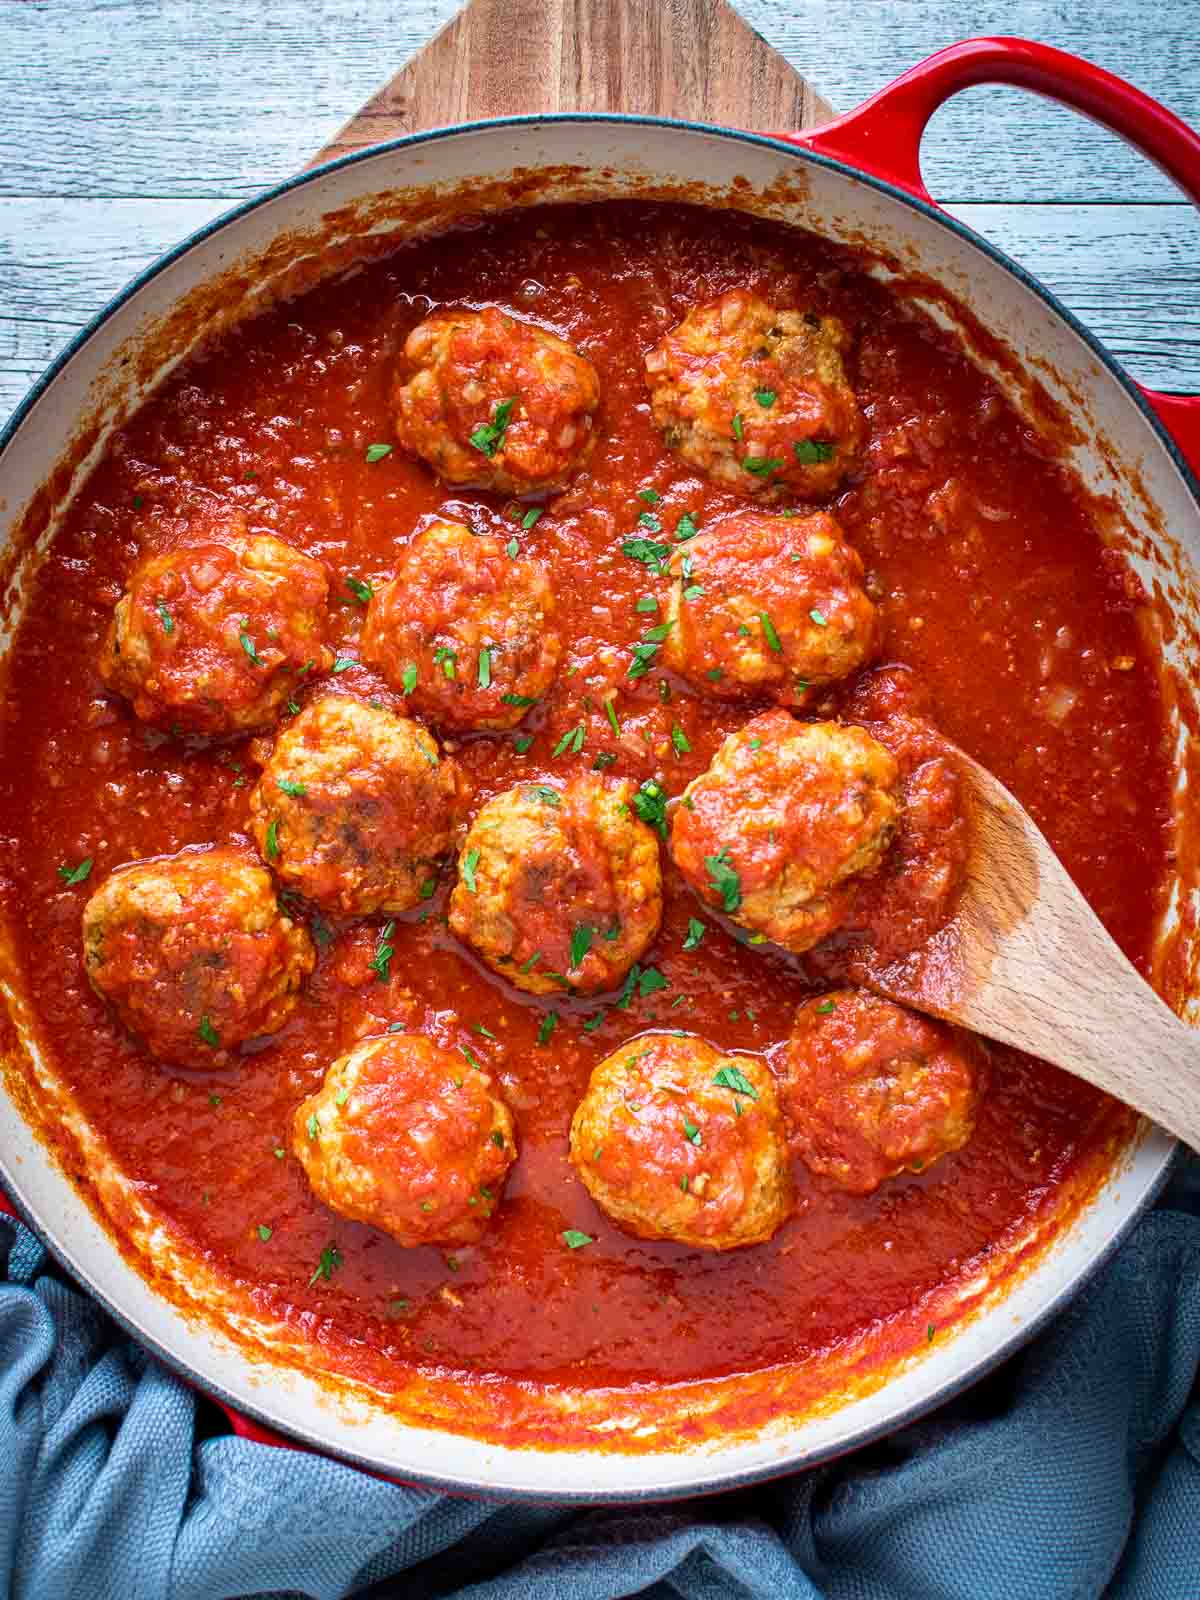 Italian Sausage Meatballs by Marcellina in Cucina